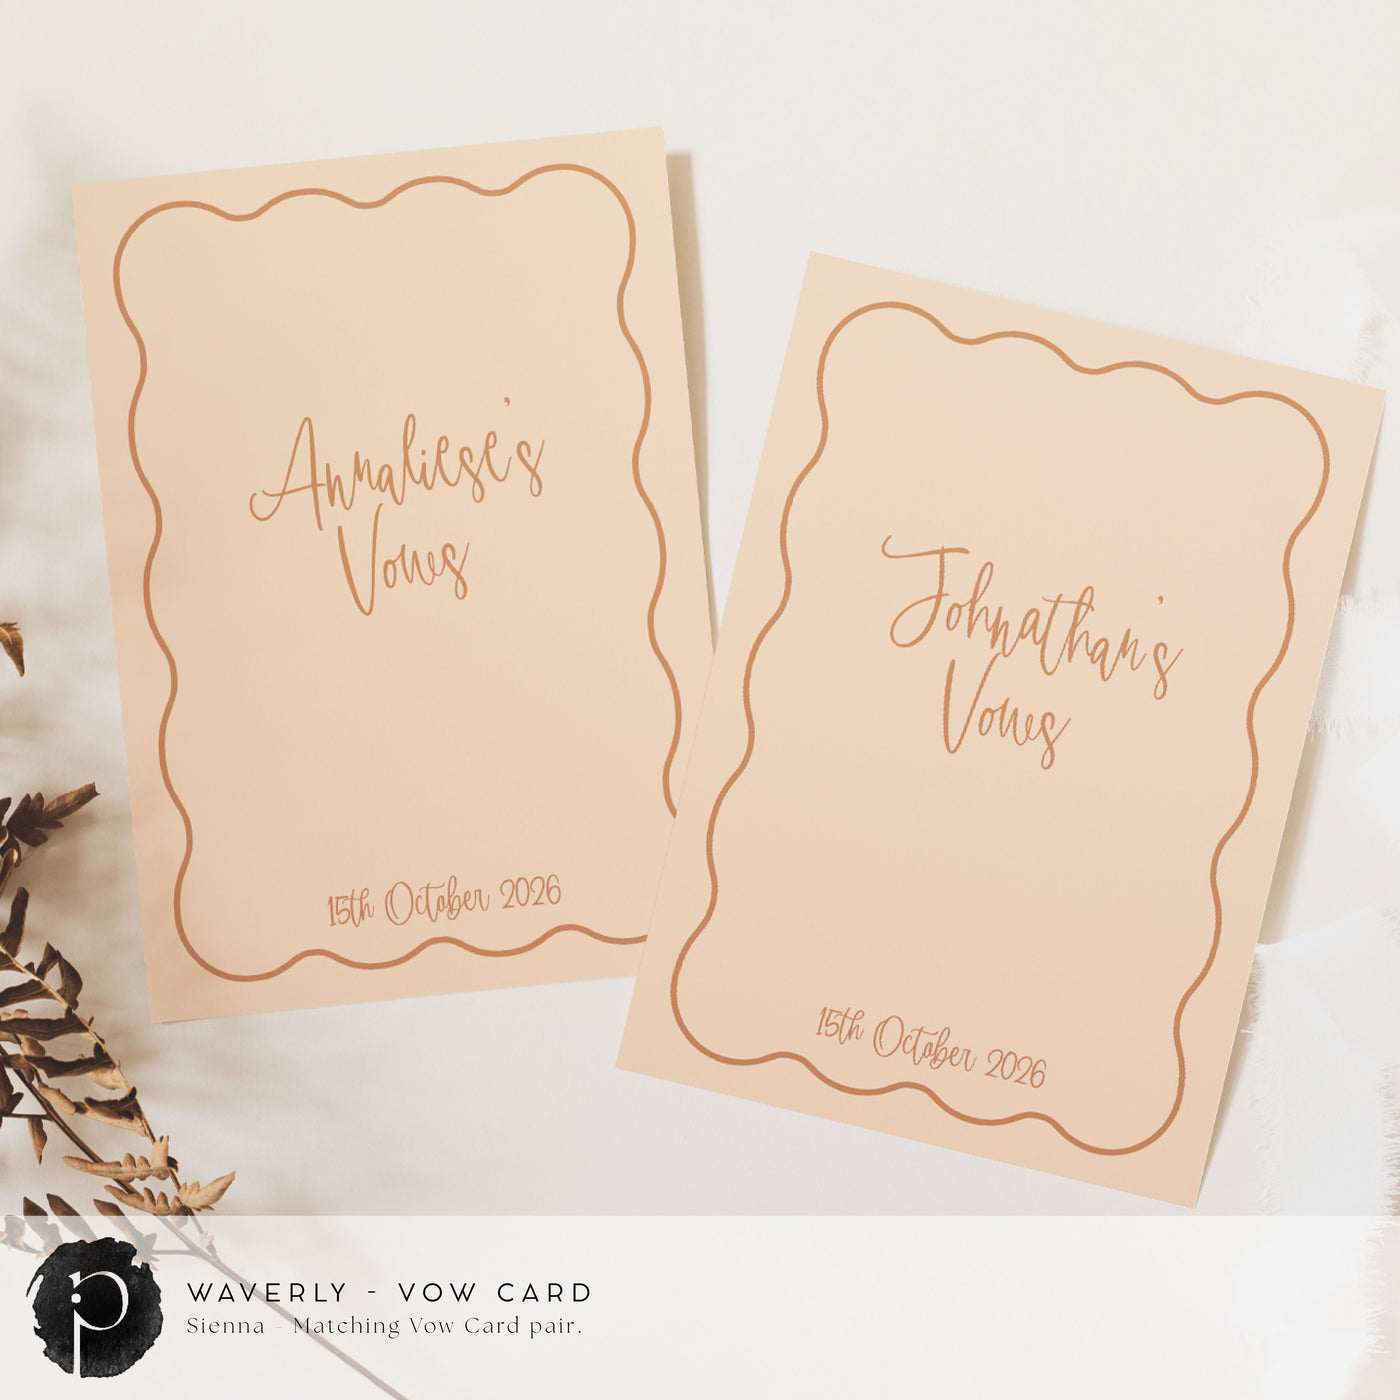 A pair of vow cards to write your wedding vows on in a modern retro wedding theme with light terracotta or clay writing on a soft peach background